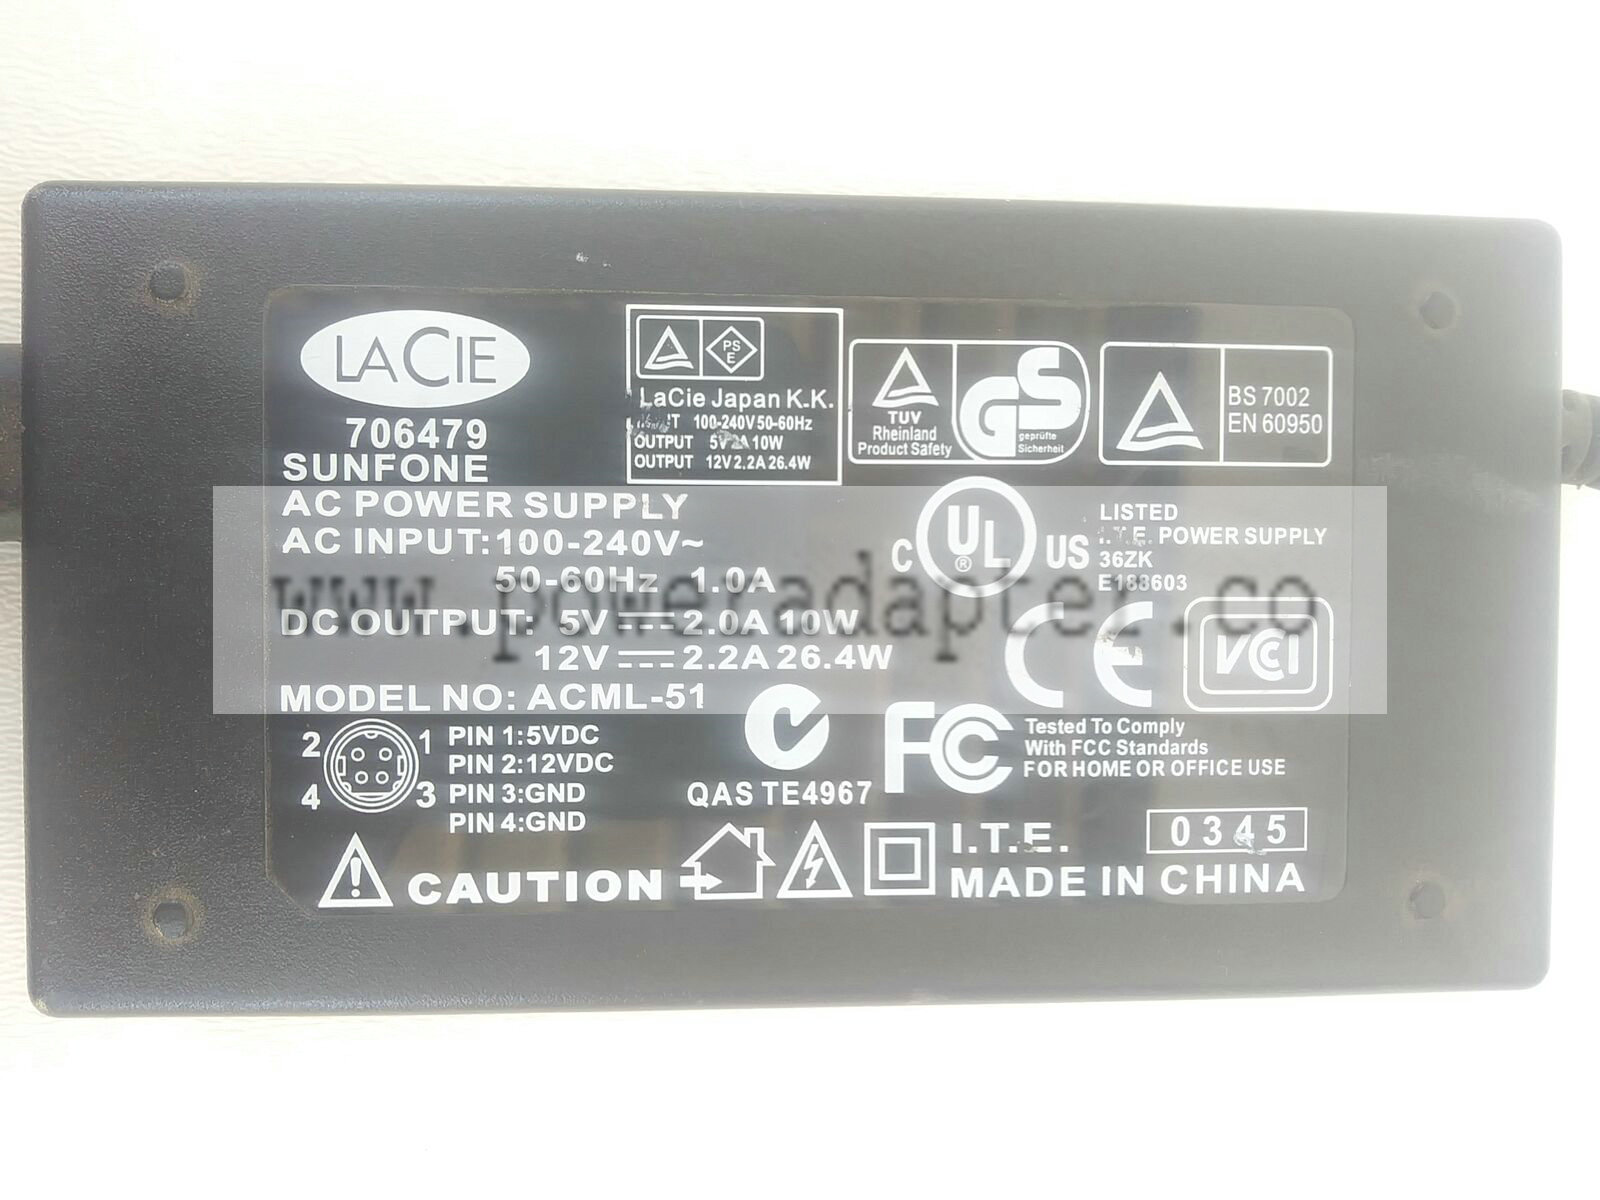 Lacie Sunfone 706479 Model ACML-51 AC Power Supply Adapter 5V/12V 2A/2.2A EA1060 Shipped secure with 1 business day h - Click Image to Close